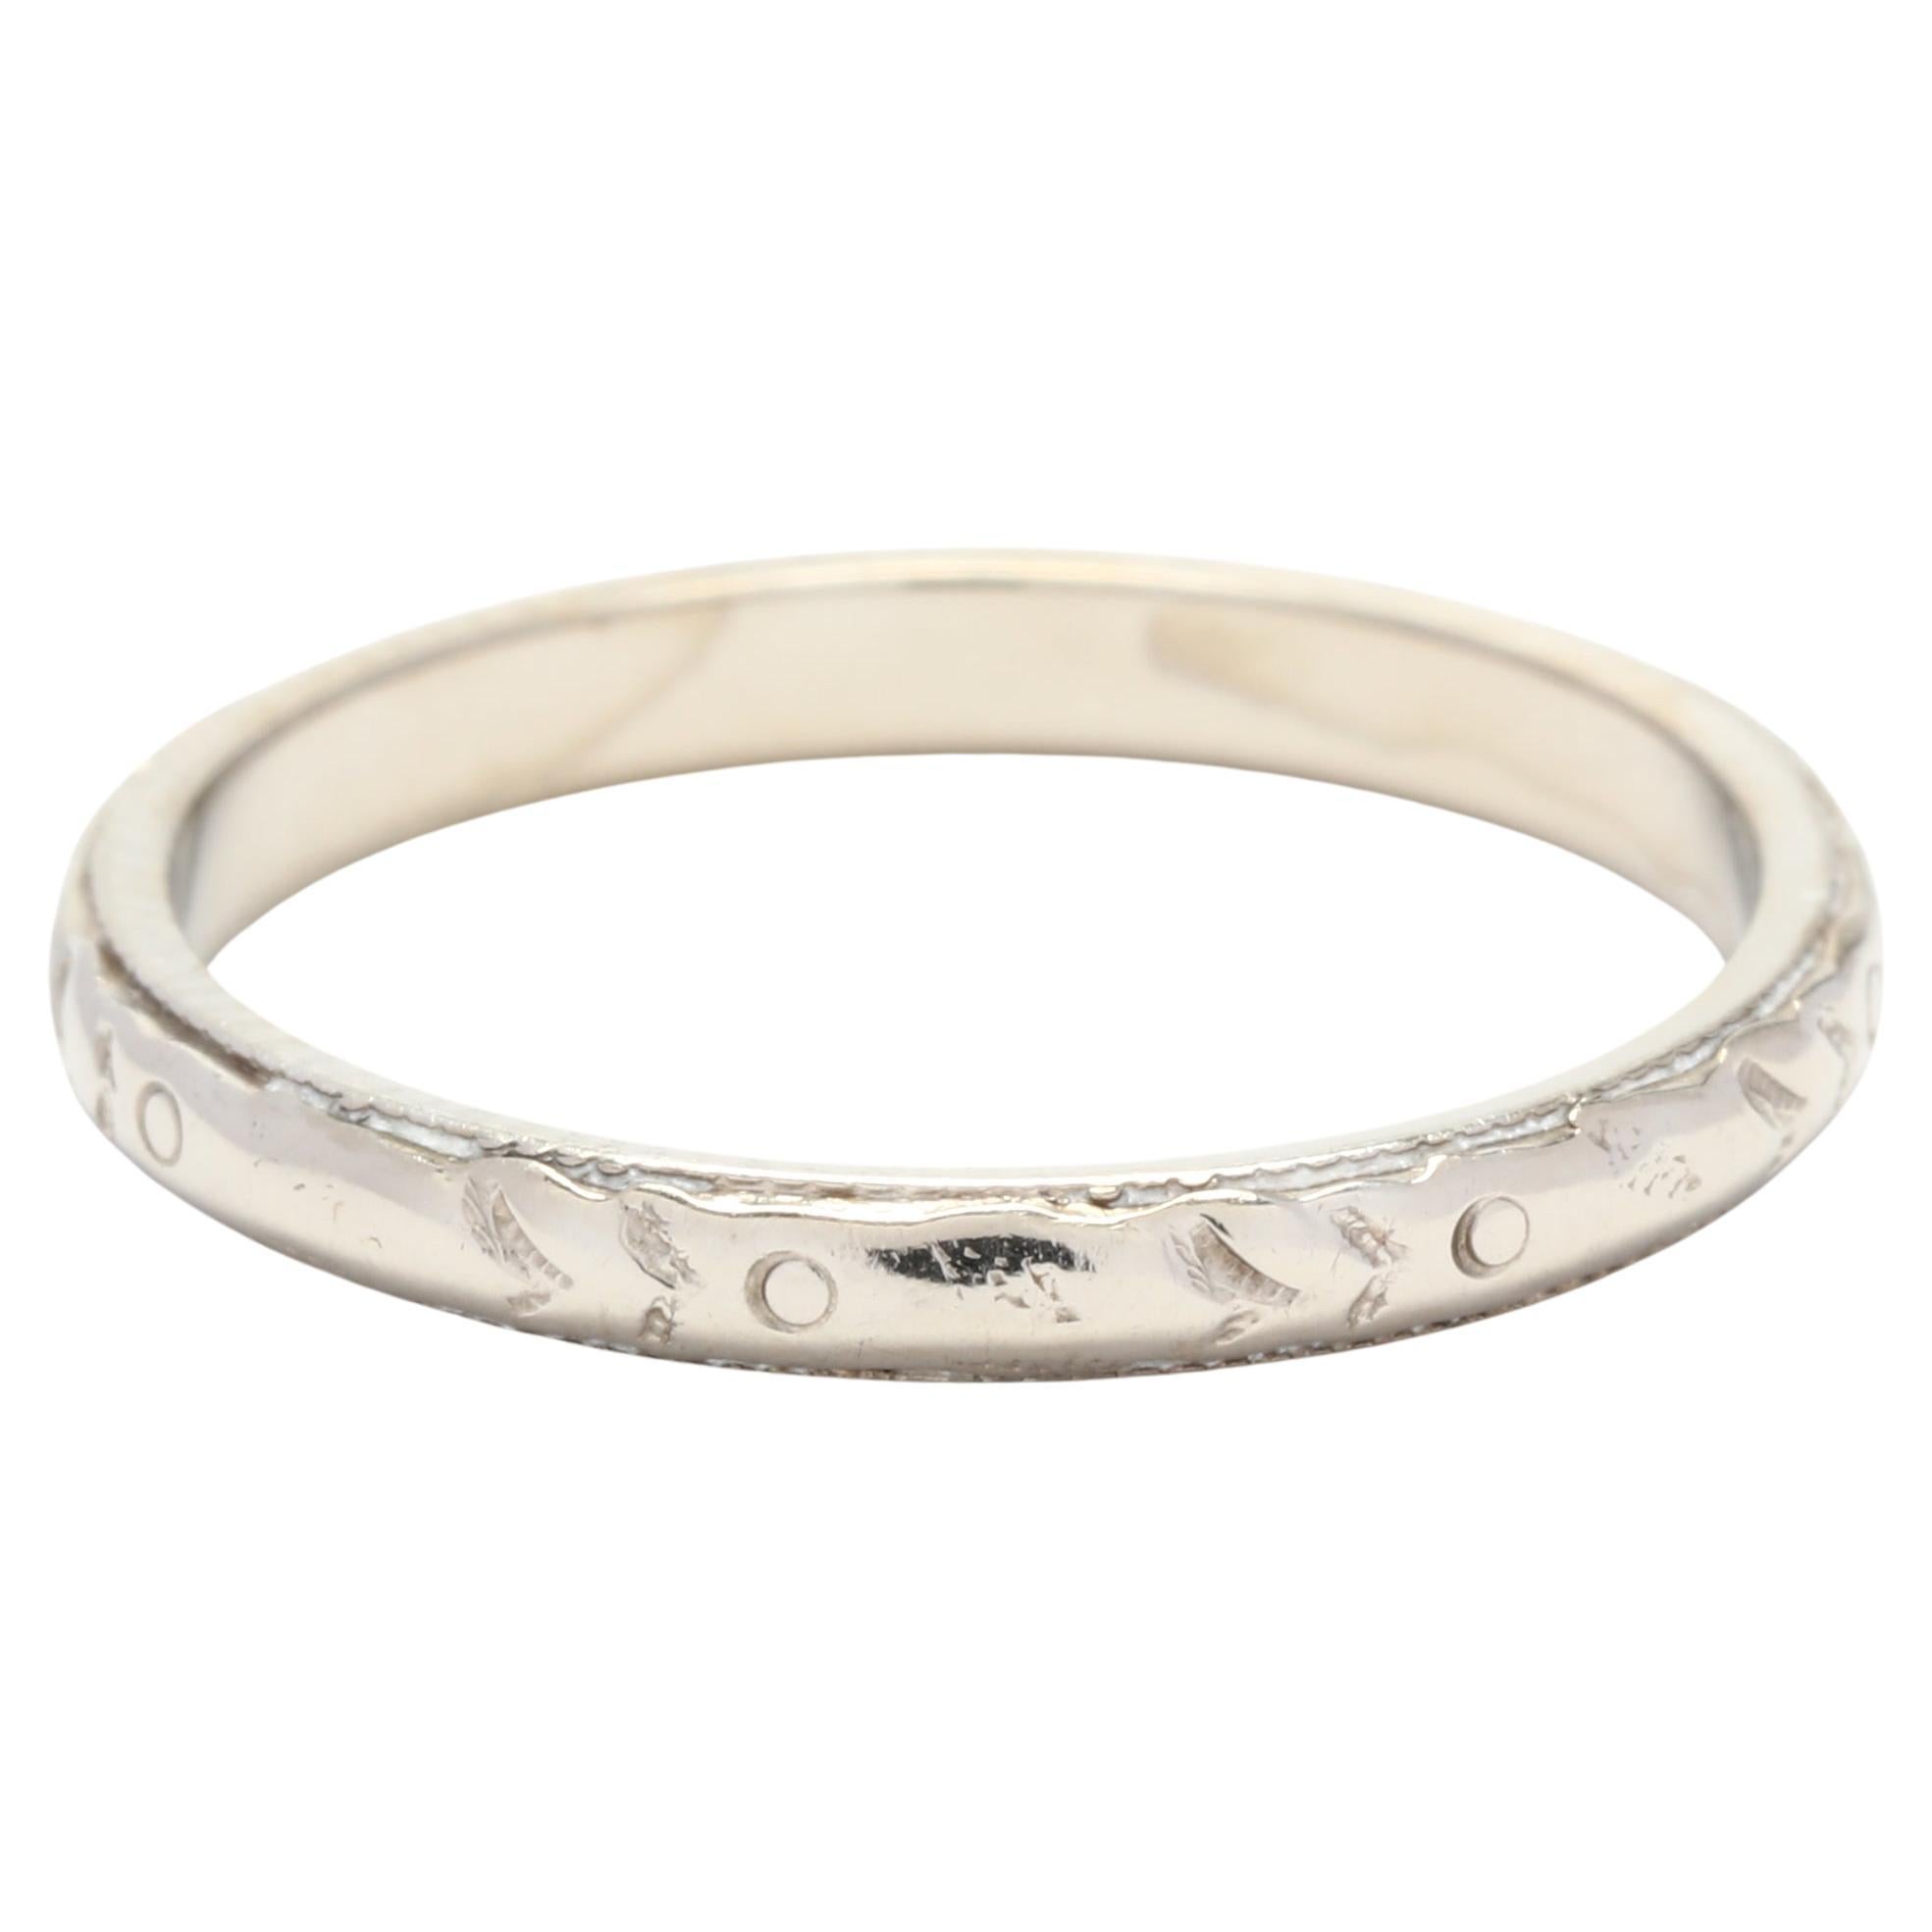 Art Deco Floral Engraved Wedding Band, 18K White Gold, Ring Size 5.25, Stackable For Sale